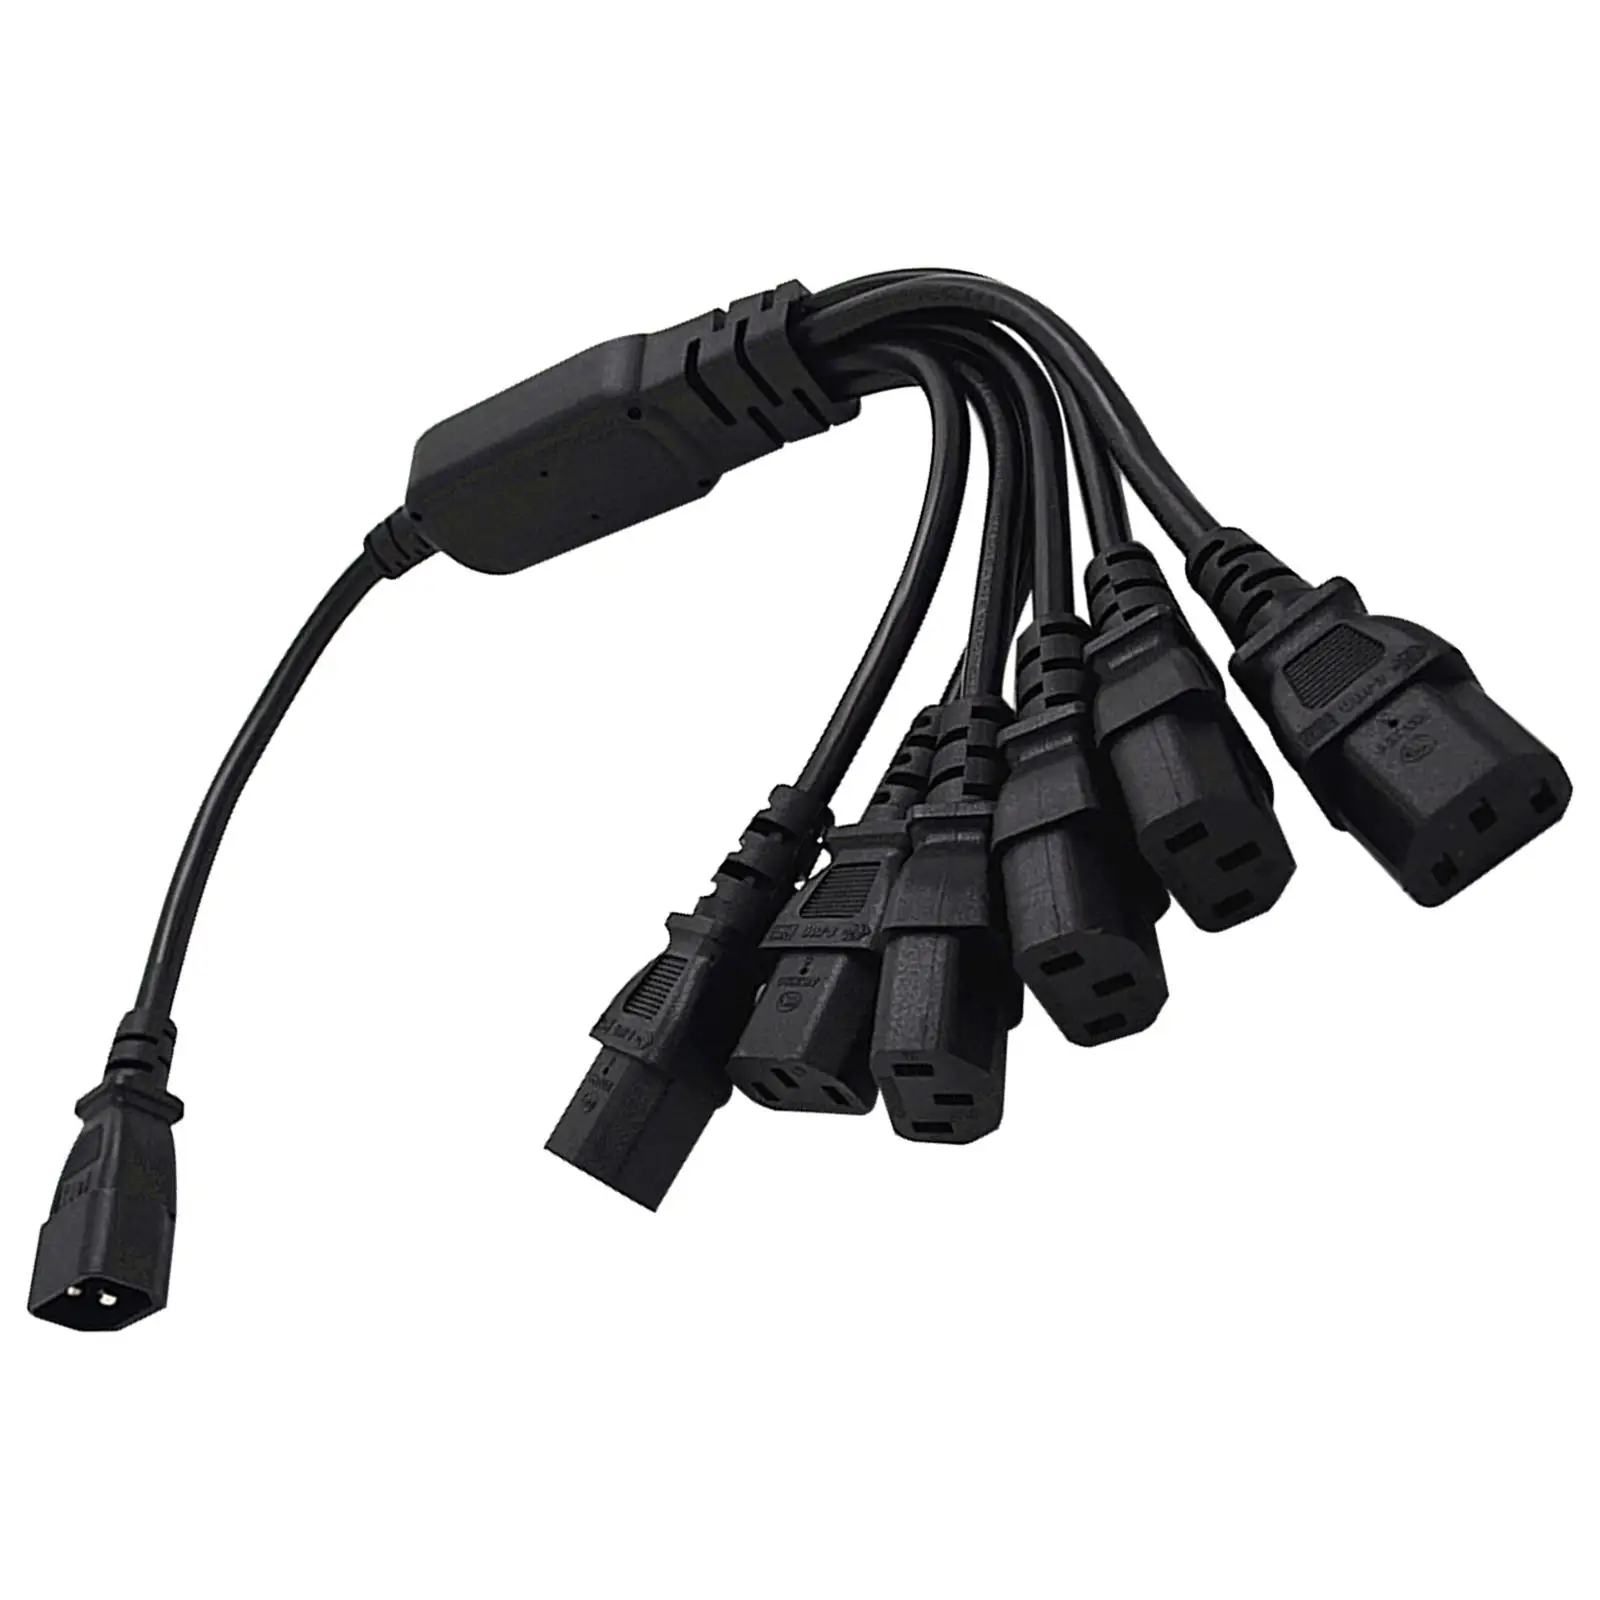 Pdu Ups System C14 Male to 6x C13 Female Y Splitter Extension Cord for PC Computer